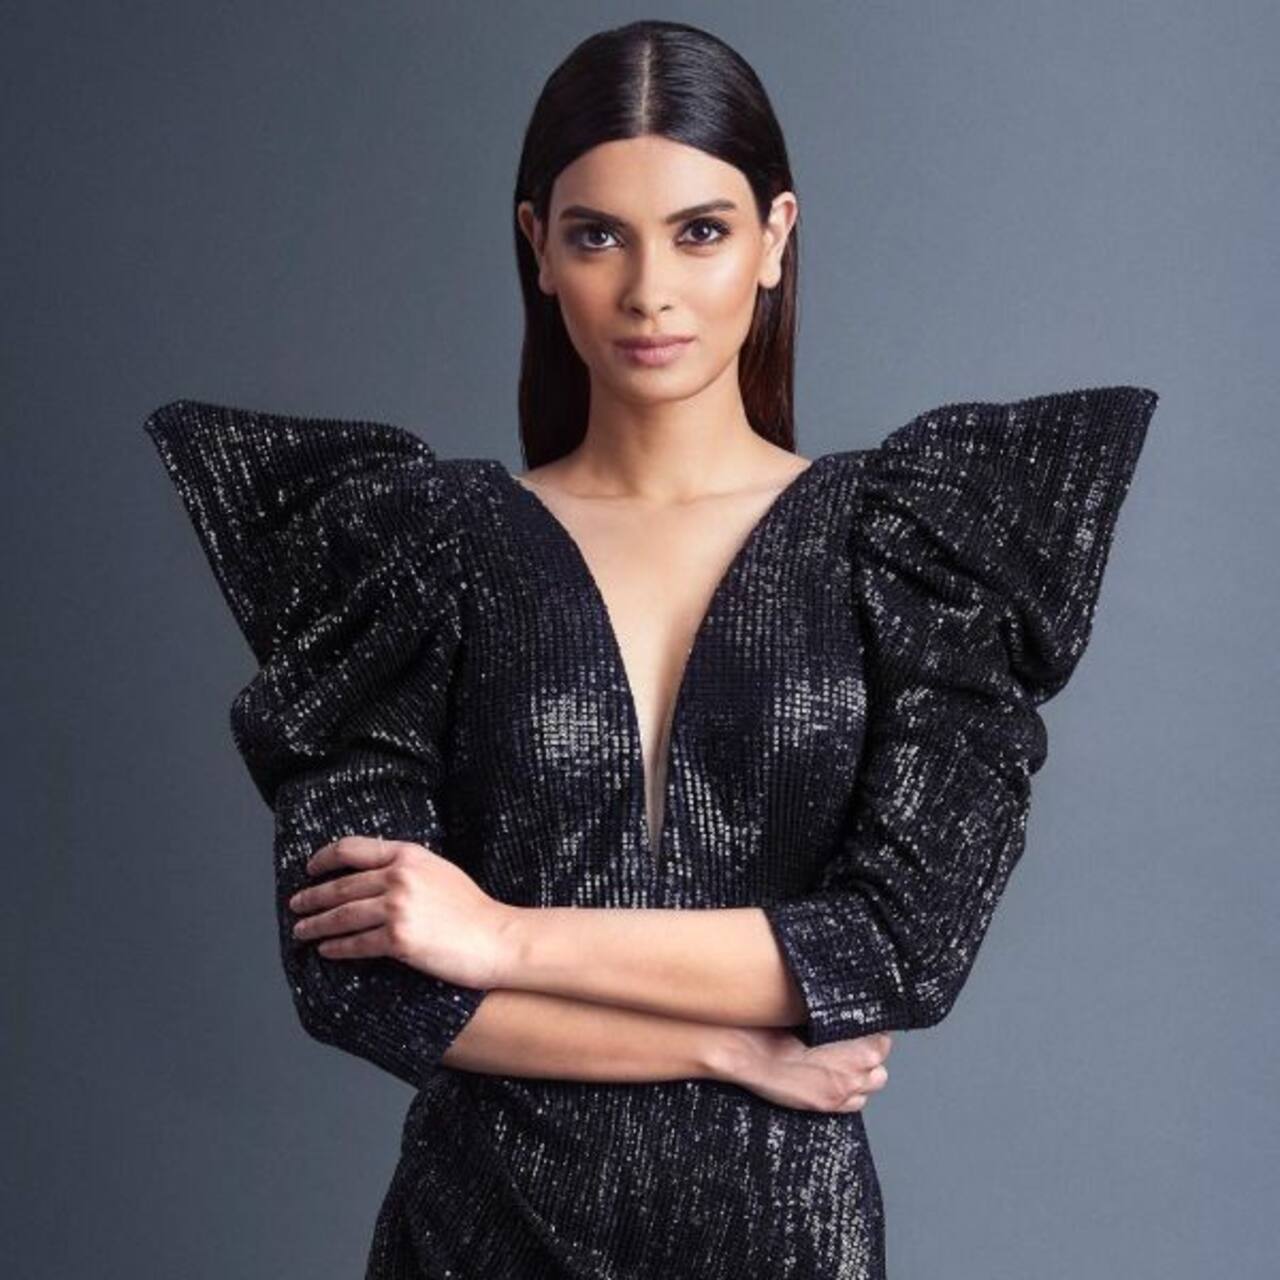 Cannes Film Festival 2019: Diana Penty excited to walk the red carpet